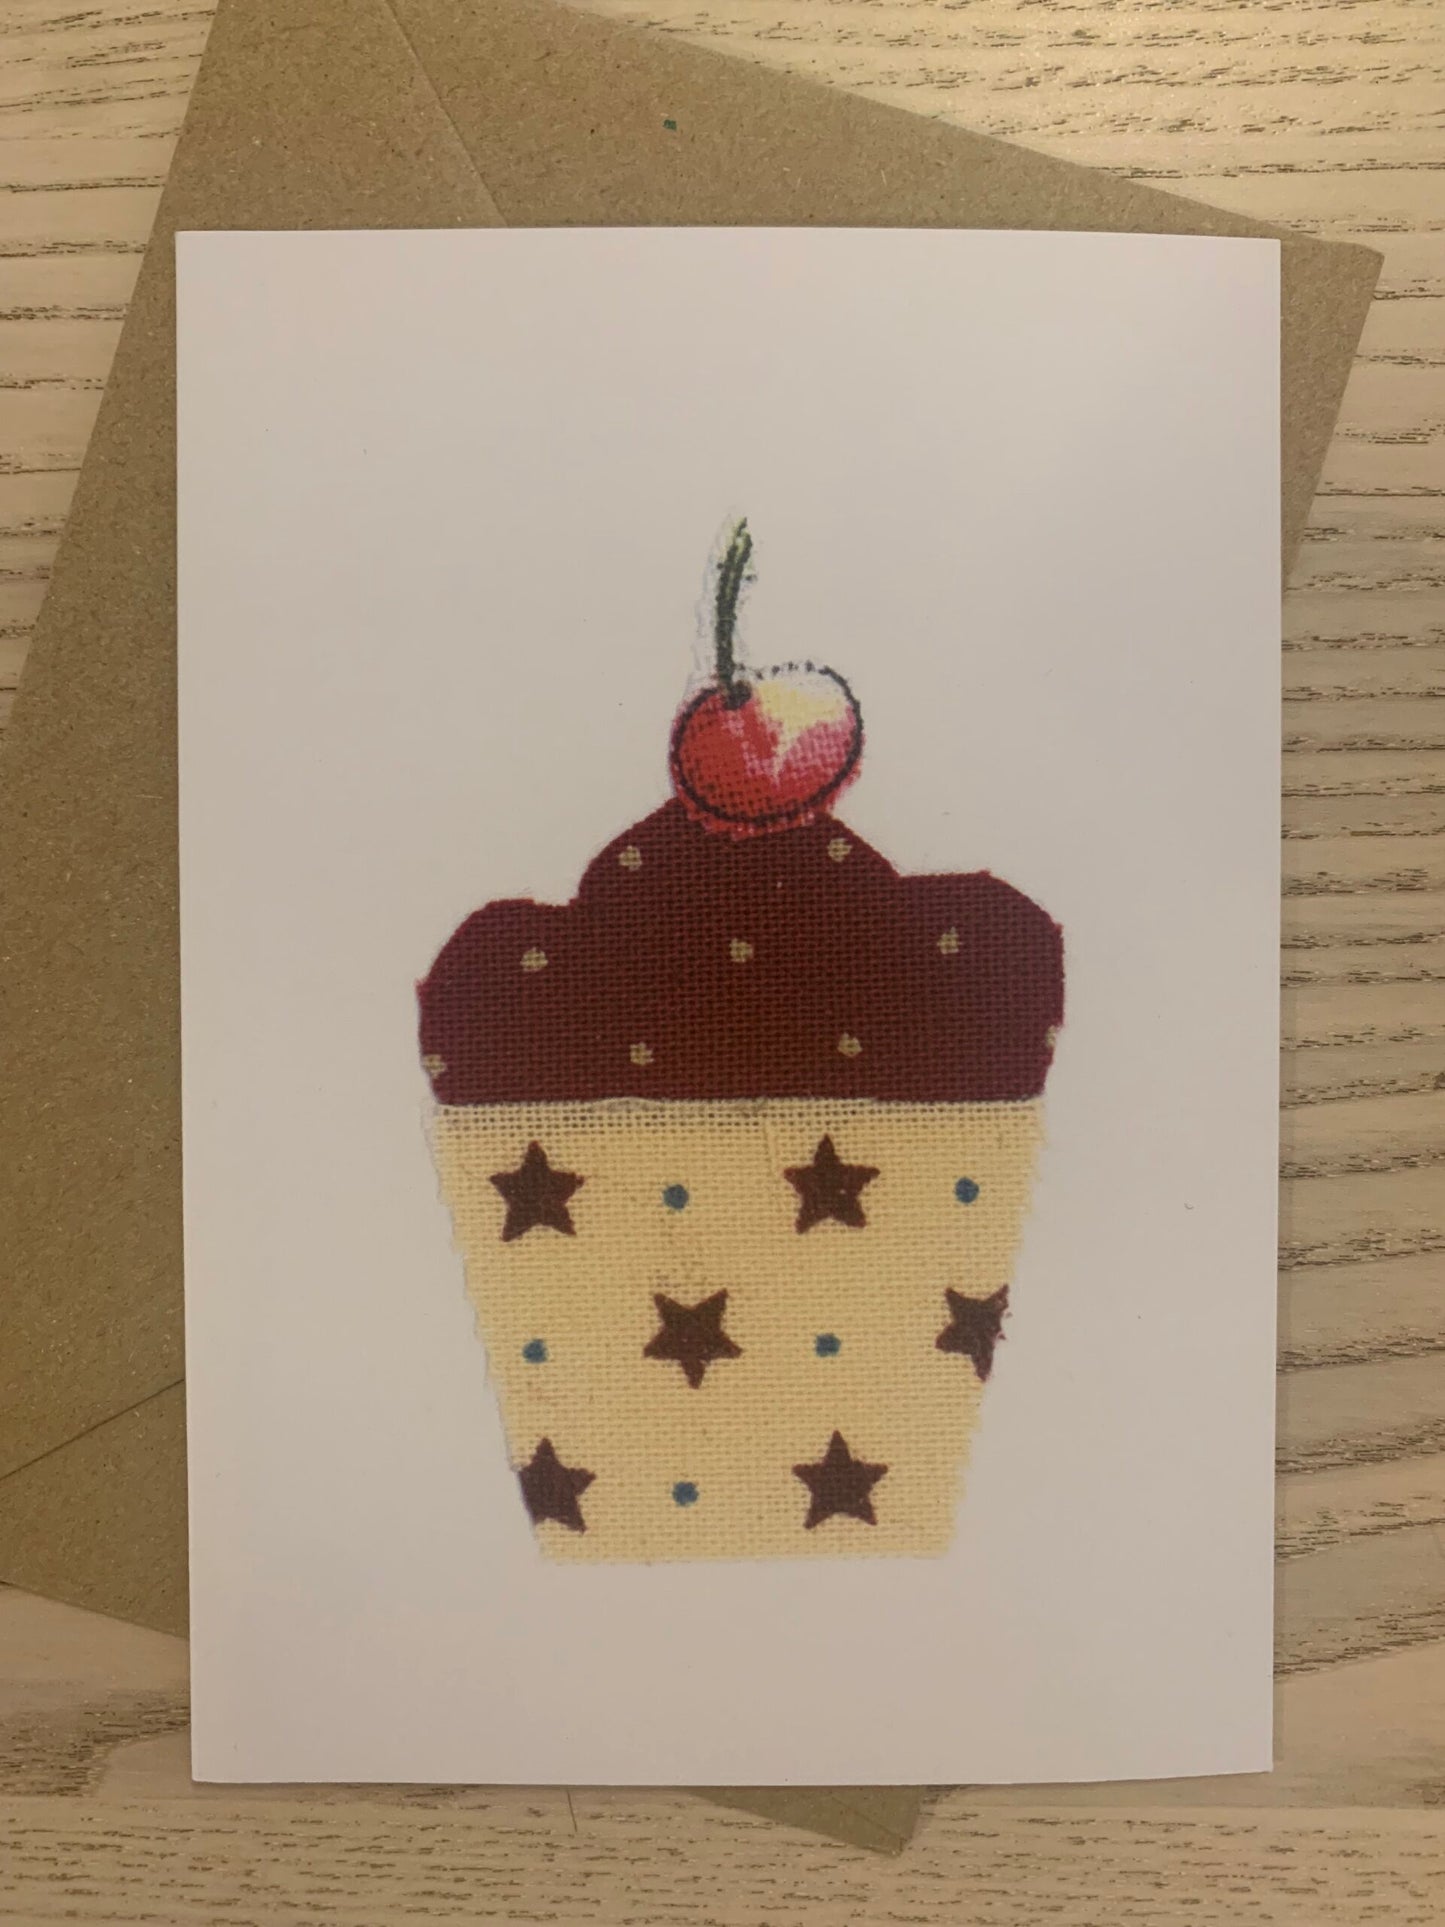 Card - Cupcake hand made &nbsp;Cupcake  Card from an original fabric collage &nbsp;by Danielle Mason-Pike  £2.50  Greetings Card with Brown Kraft Envelope  Blank inside for your own message  Exclusive to Seawitch Stores  Designed &amp; Printed in Cornwall